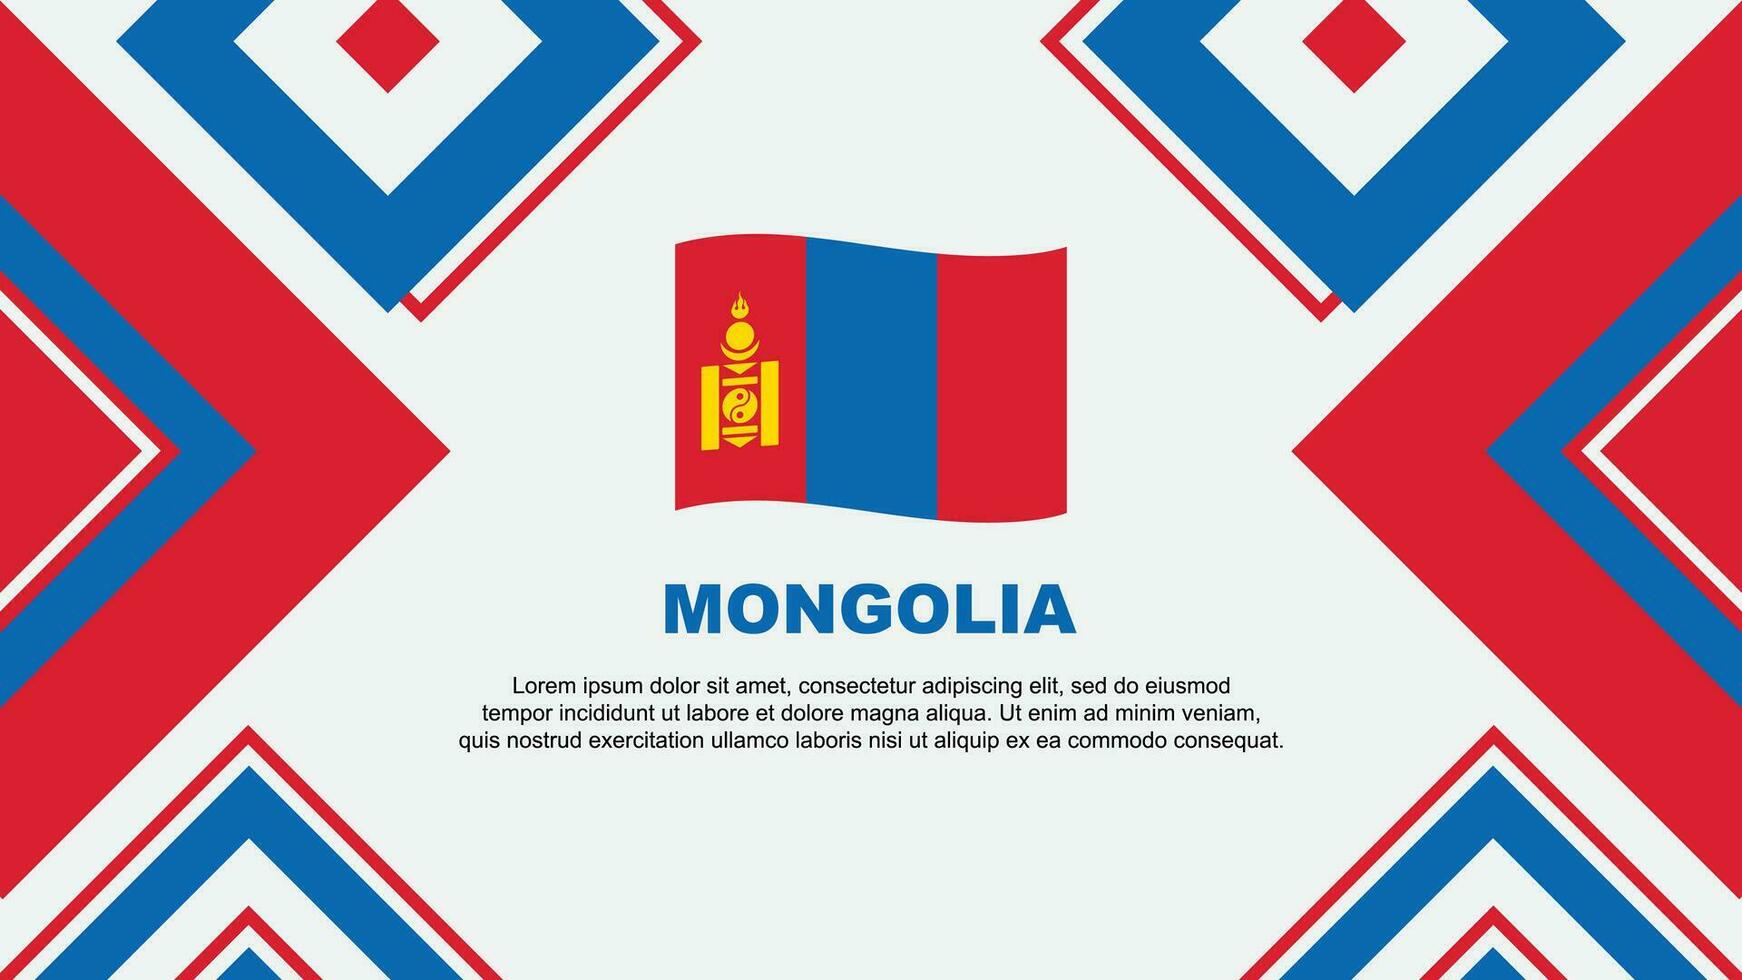 Mongolia Flag Abstract Background Design Template. Mongolia Independence Day Banner Wallpaper Vector Illustration. Mongolia Independence Day